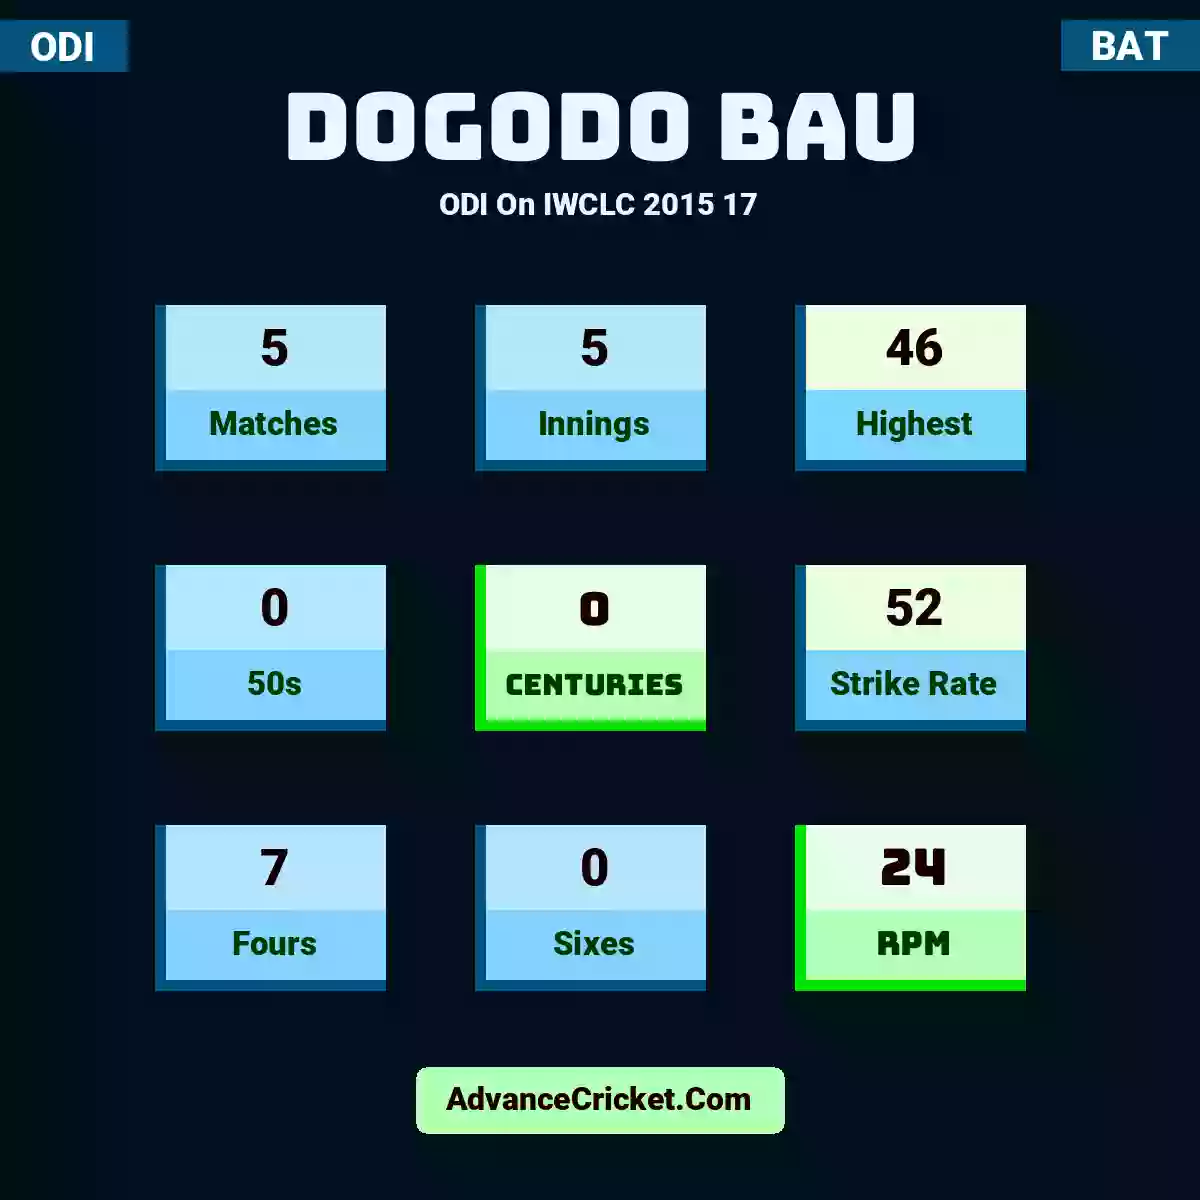 Dogodo Bau ODI  On IWCLC 2015 17, Dogodo Bau played 5 matches, scored 46 runs as highest, 0 half-centuries, and 0 centuries, with a strike rate of 52. D.Bau hit 7 fours and 0 sixes, with an RPM of 24.